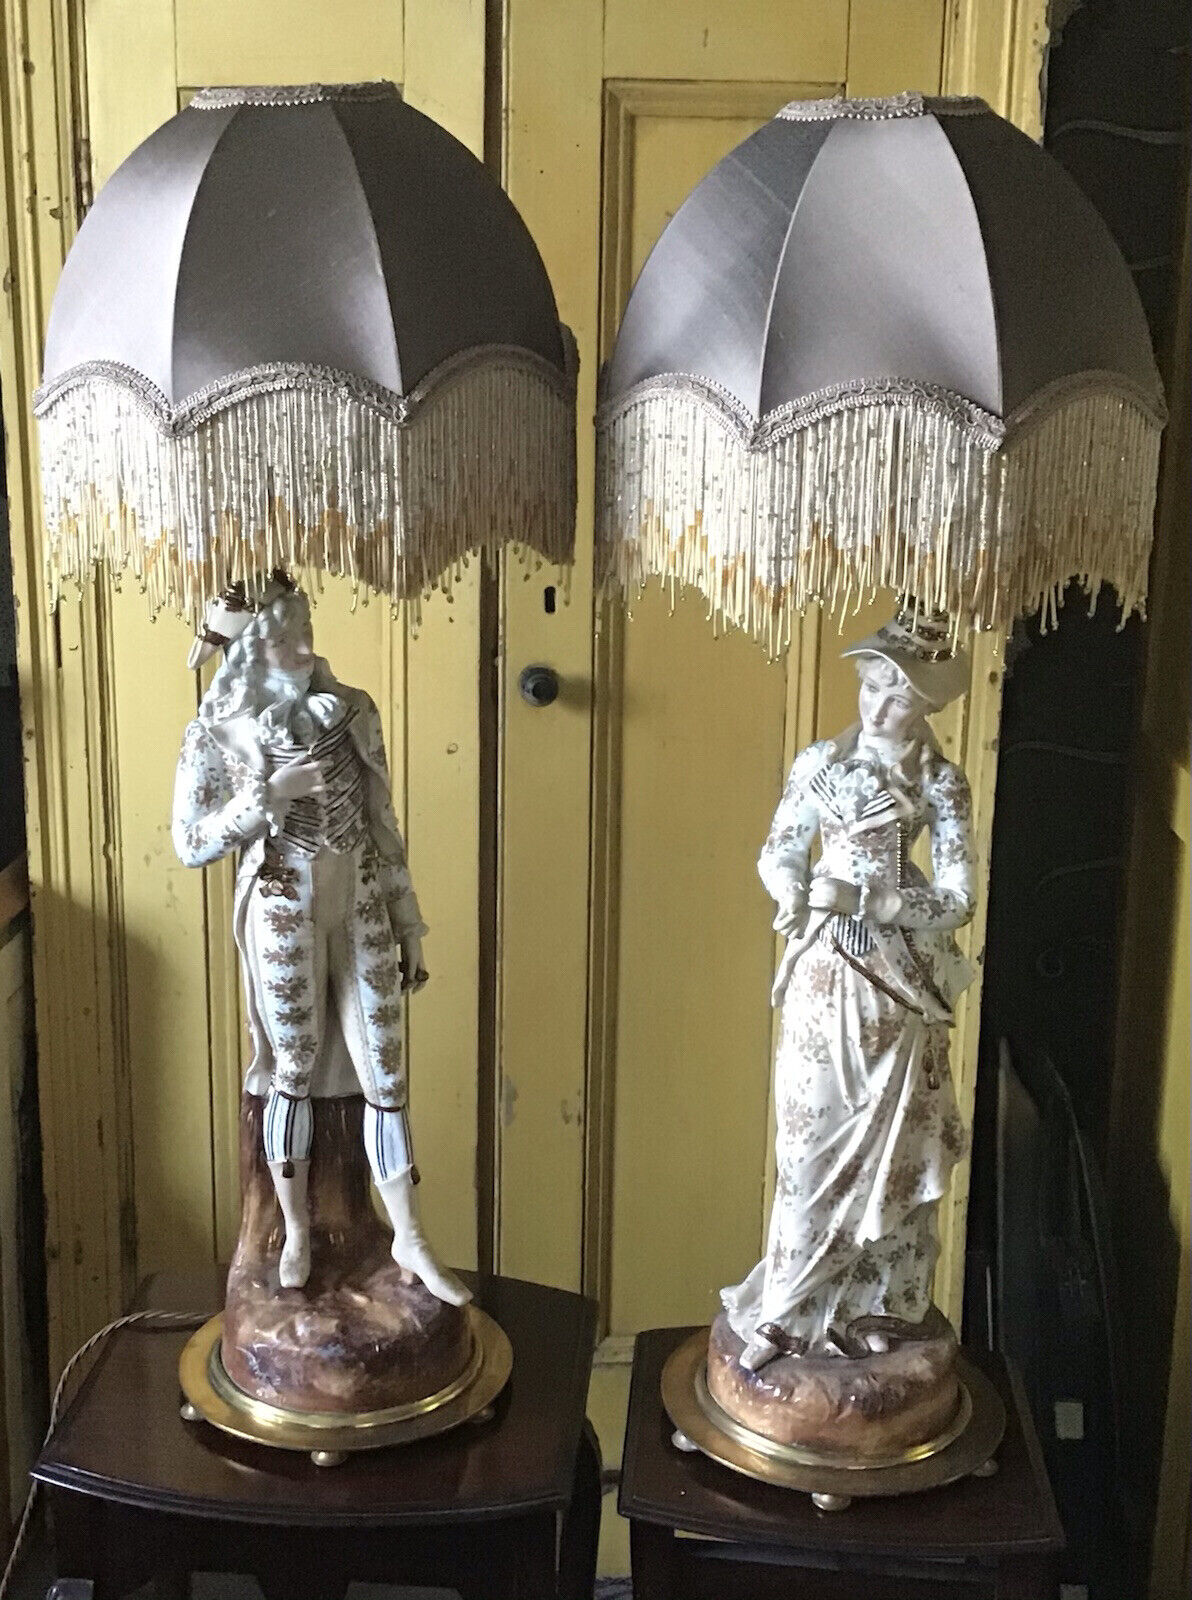 Stunning Pair Of Handmade Silk And Beaded Shades for Table Lamps New.